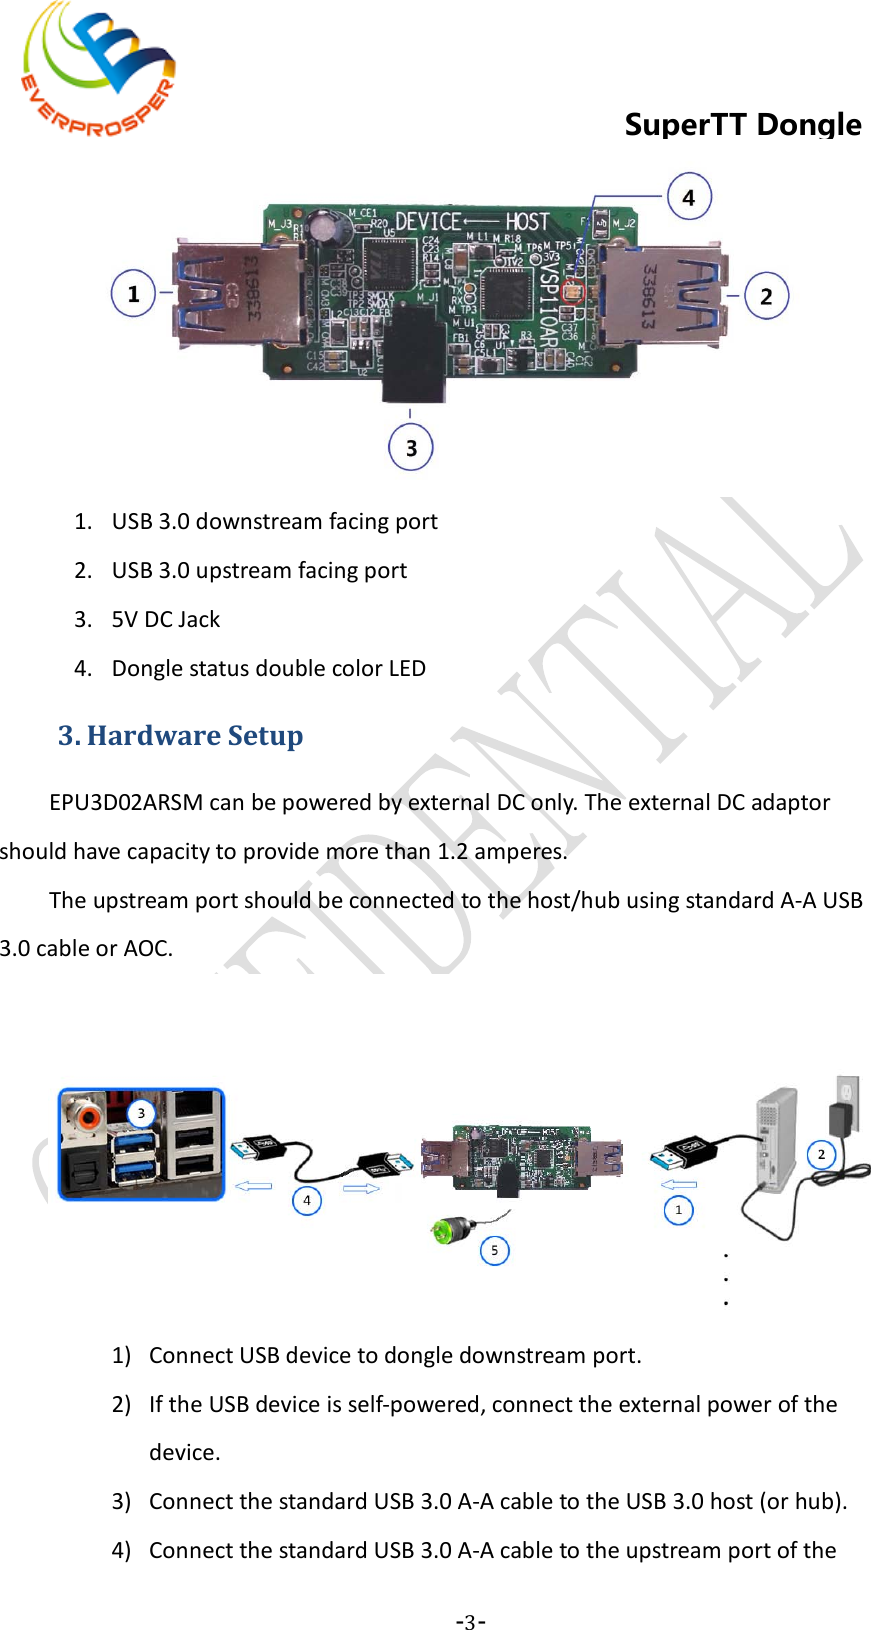    -3-  SuperTT Dongle  1. USB 3.0 downstream facing port 2. USB 3.0 upstream facing port 3. 5V DC Jack 4. Dongle status double color LED 3. Hardware Setup EPU3D02ARSM can be powered by external DC only. The external DC adaptor should have capacity to provide more than 1.2 amperes. The upstream port should be connected to the host/hub using standard A-A USB 3.0 cable or AOC.  1) Connect USB device to dongle downstream port. 2) If the USB device is self-powered, connect the external power of the device. 3) Connect the standard USB 3.0 A-A cable to the USB 3.0 host (or hub). 4) Connect the standard USB 3.0 A-A cable to the upstream port of the 